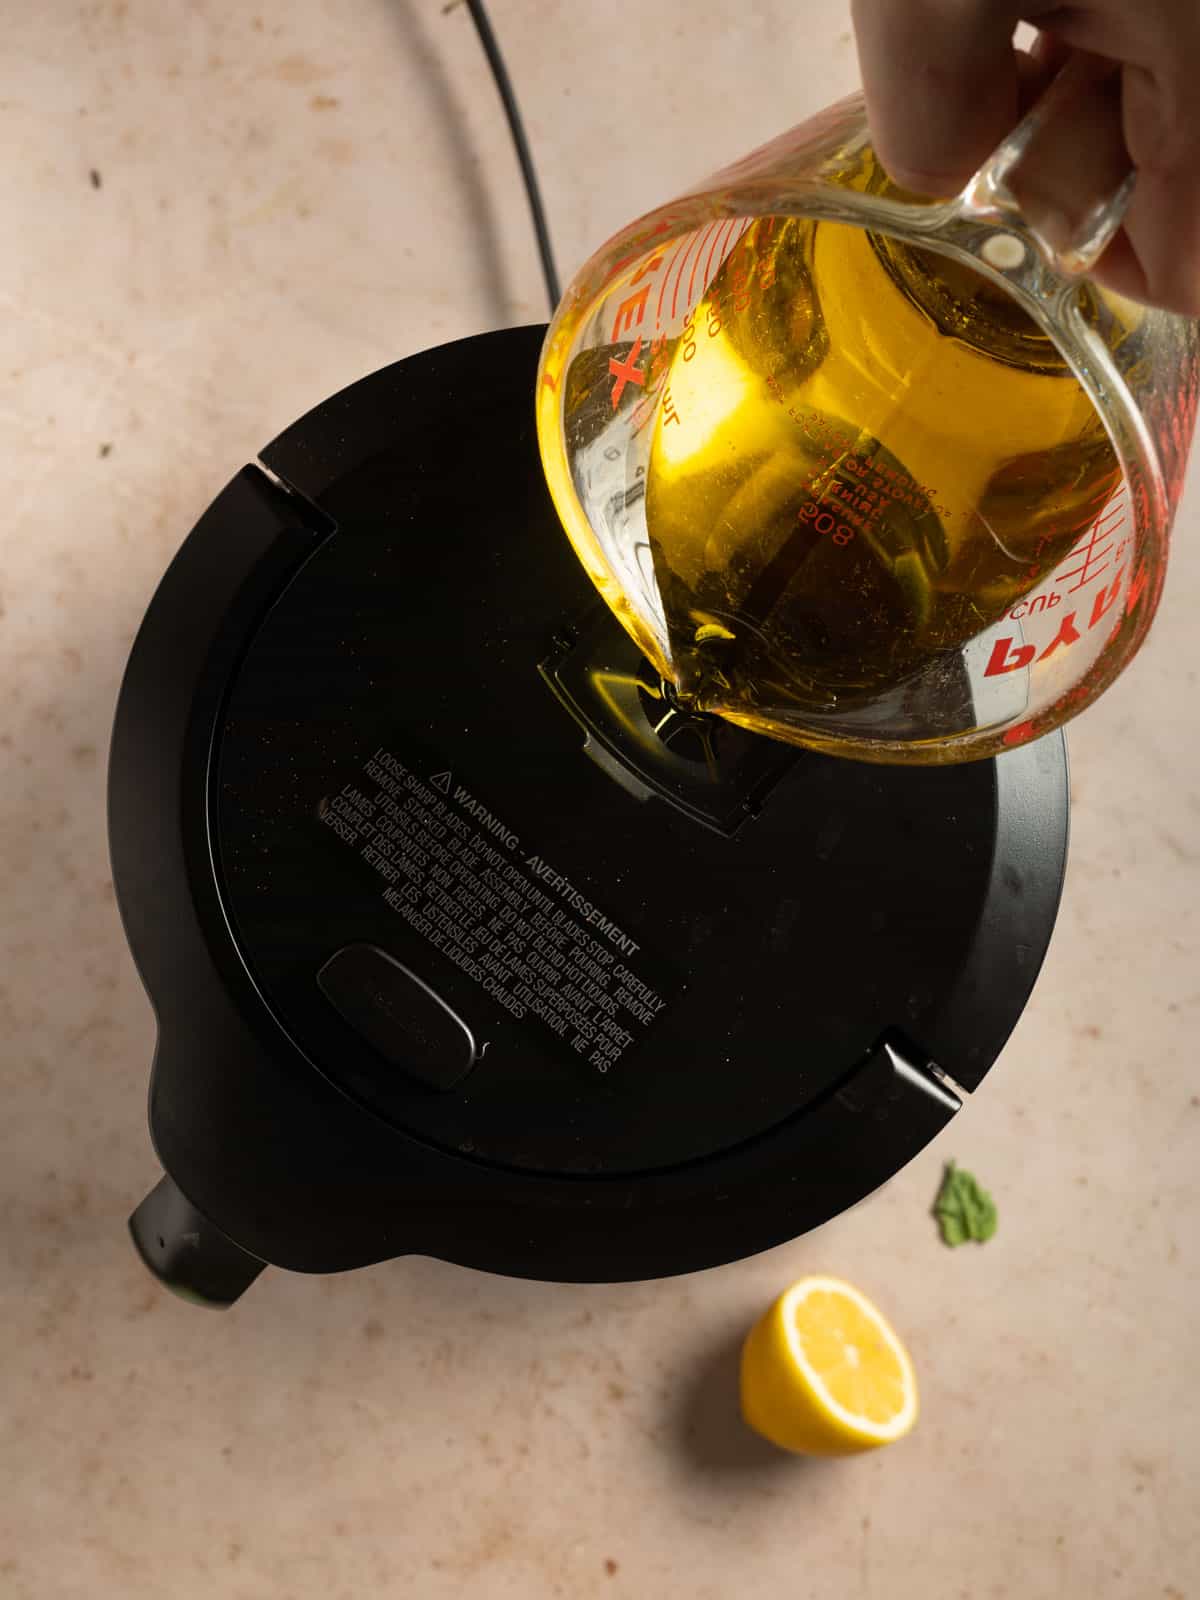 Drizzling olive oil into a food processor.